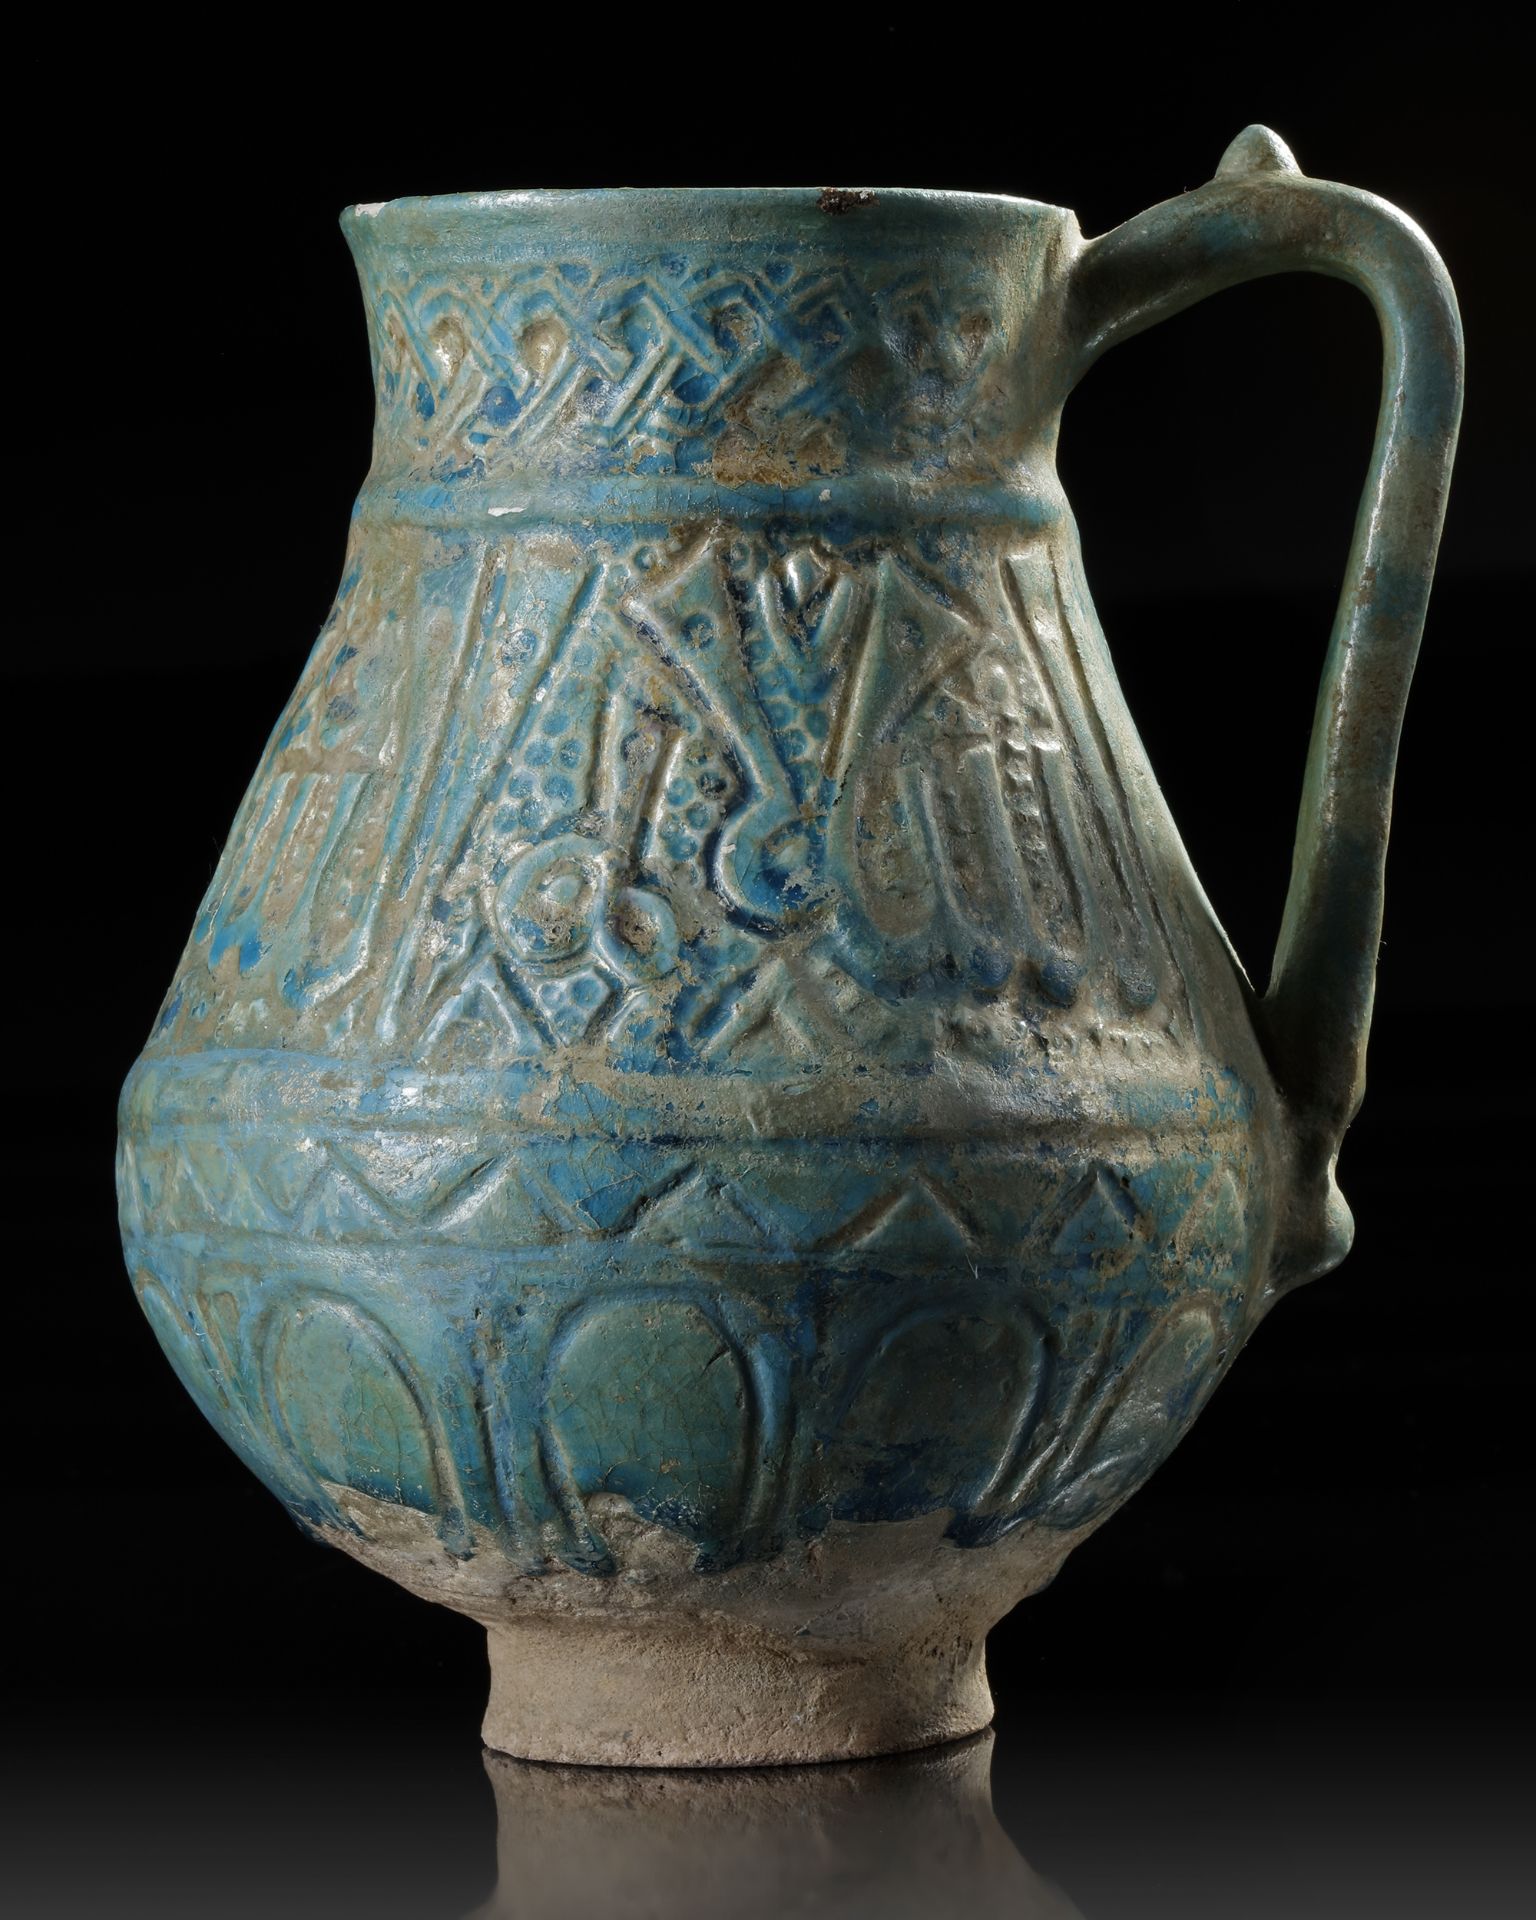 A TURQUOISE GLAZED POTTERY EWER, PROBABLY NISHAPUR, 12TH CENTURY - Image 2 of 8